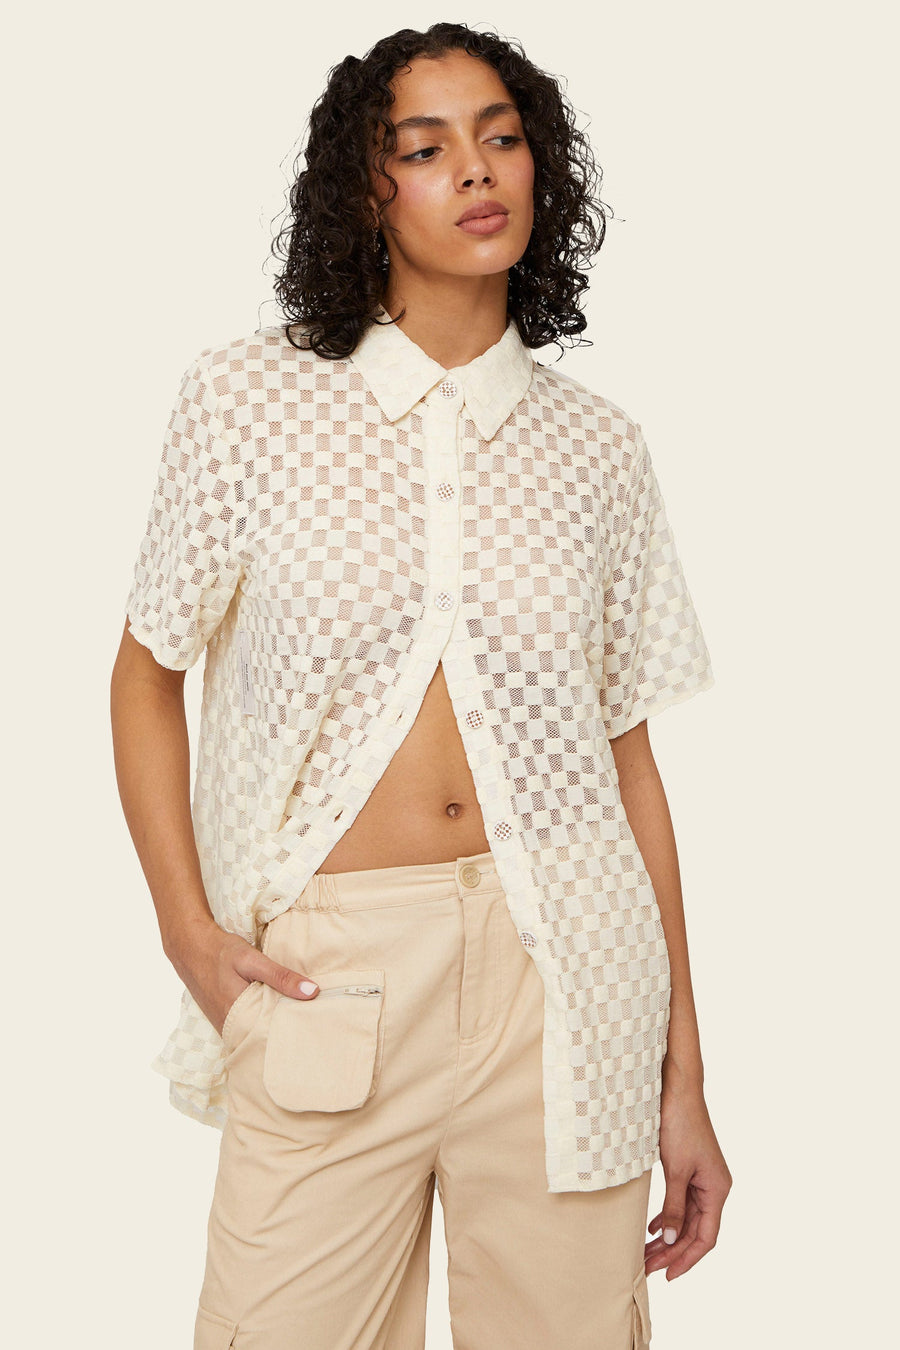 Harmony Velour Mesh Button Up in White Noise